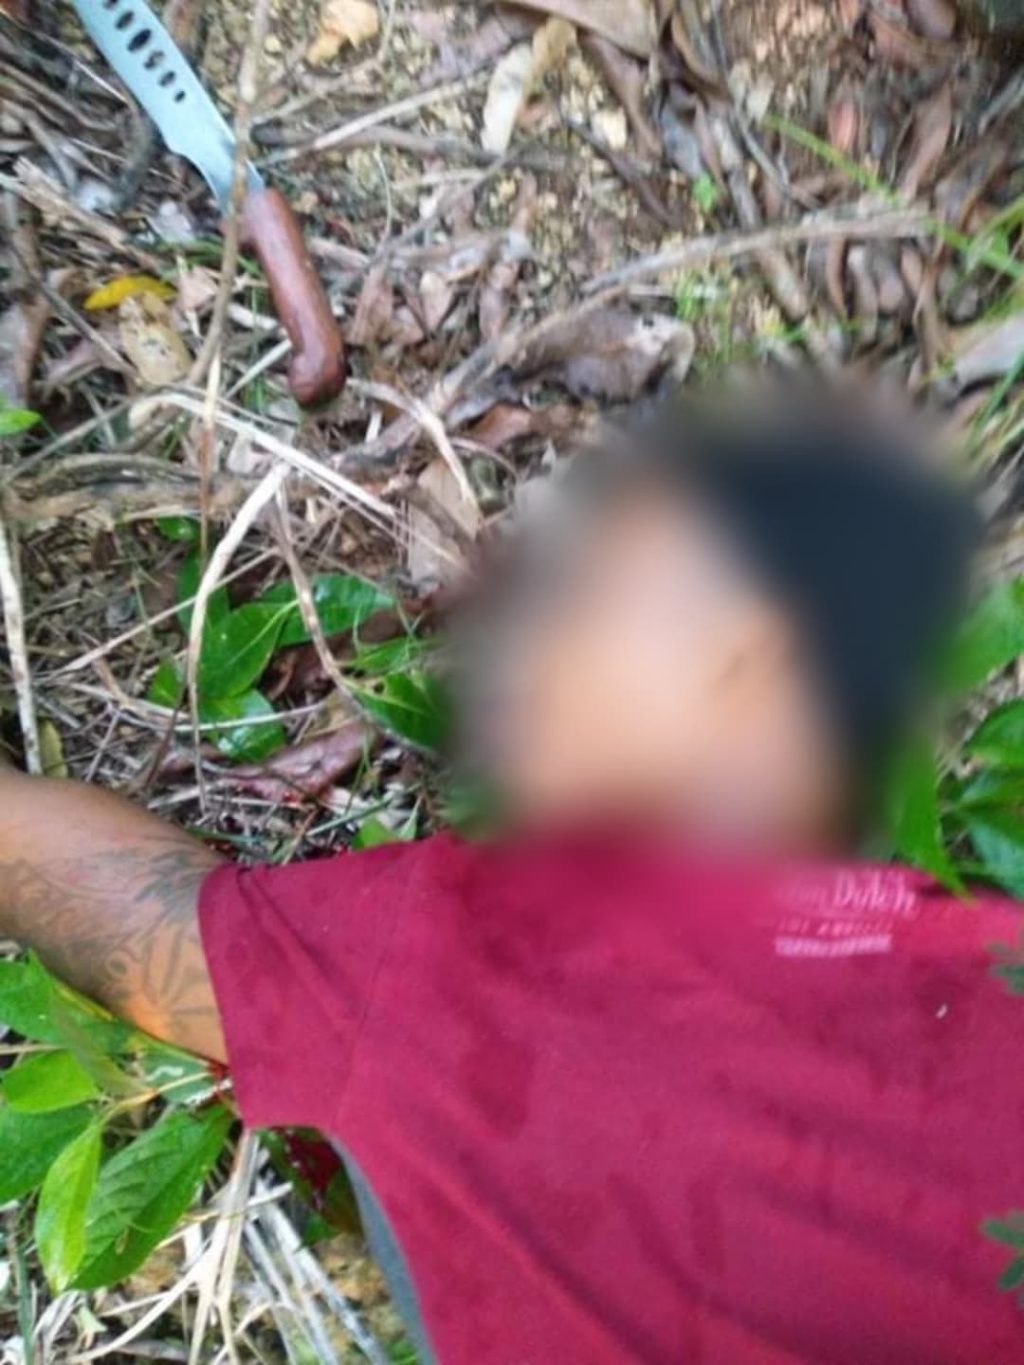 Rodelito Dublin, 22, is killed by a Daanbantayan policeman after Dublin resisted arrest and attacked the policeman with a knife. The incident happened while police was there to arrest Dublin, who is accused of raping a minor. | Photo from Daanbantayan Police Station